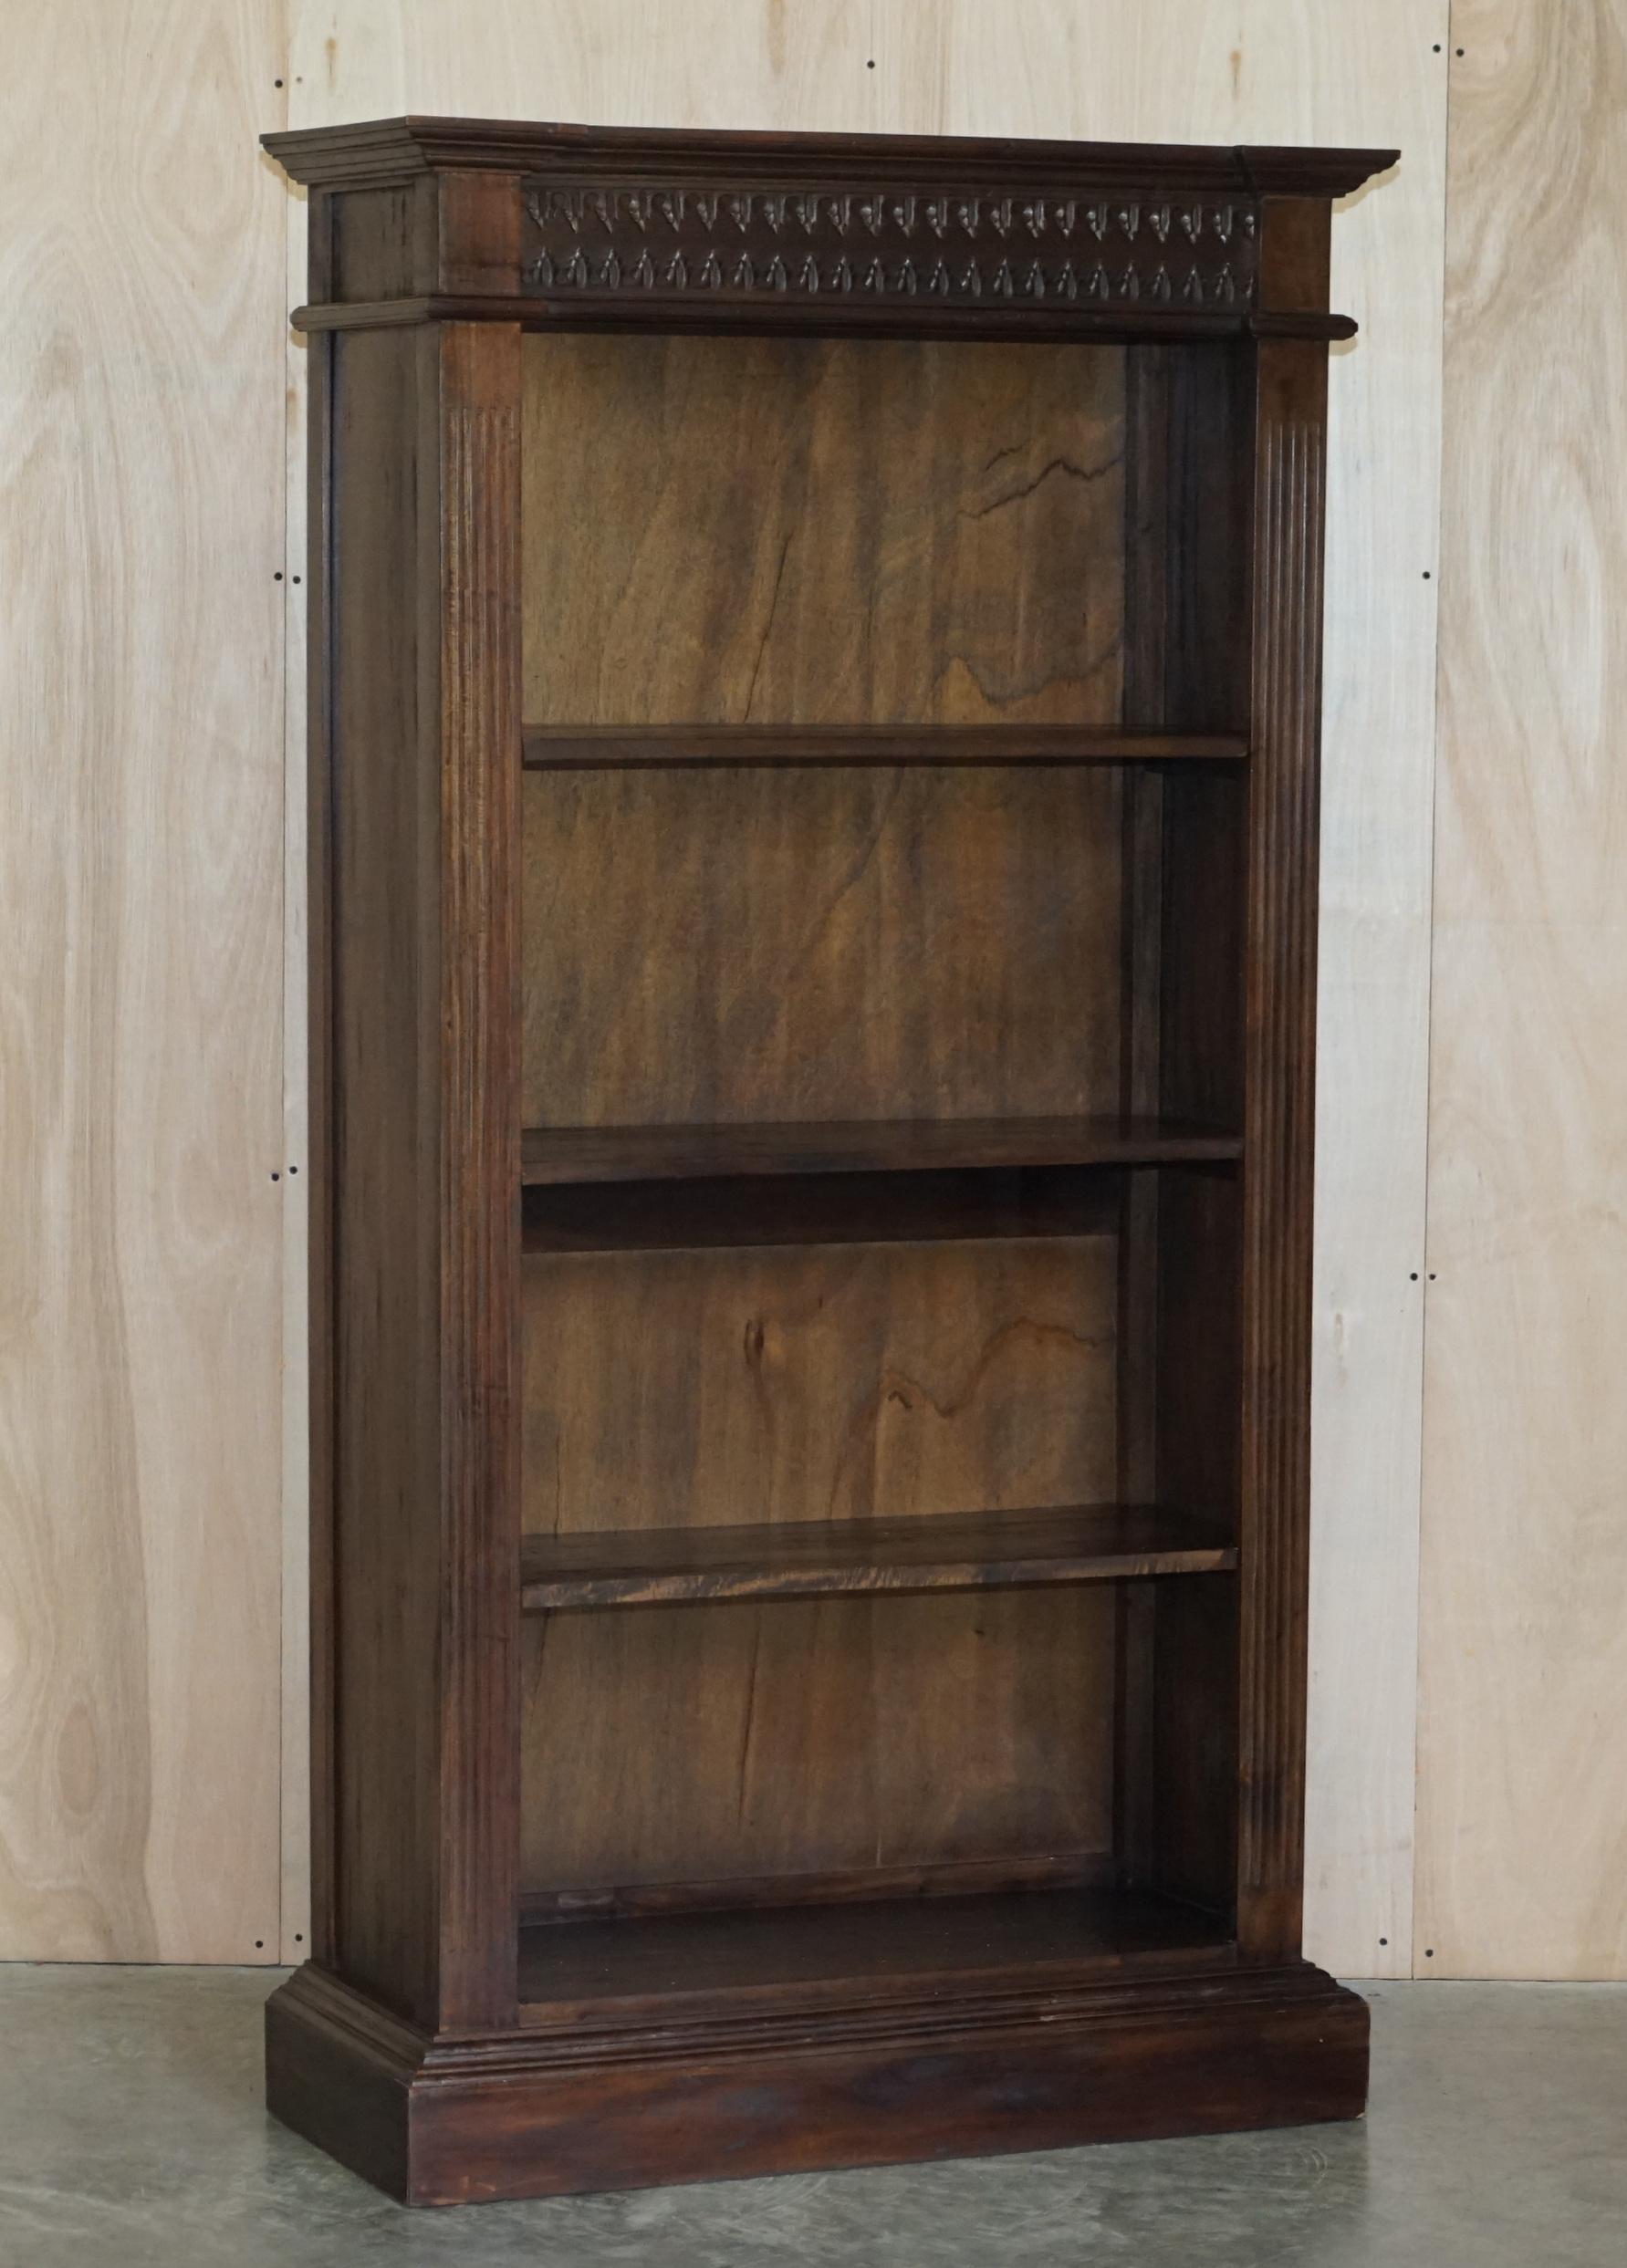 We are delighted to offer this set of three vintage hand carved solid mahogany, Jacobean revival style open library bookcases

A very good looking and well made suite, they have ornate carvings to the top which are very Jacobean revival, the bases